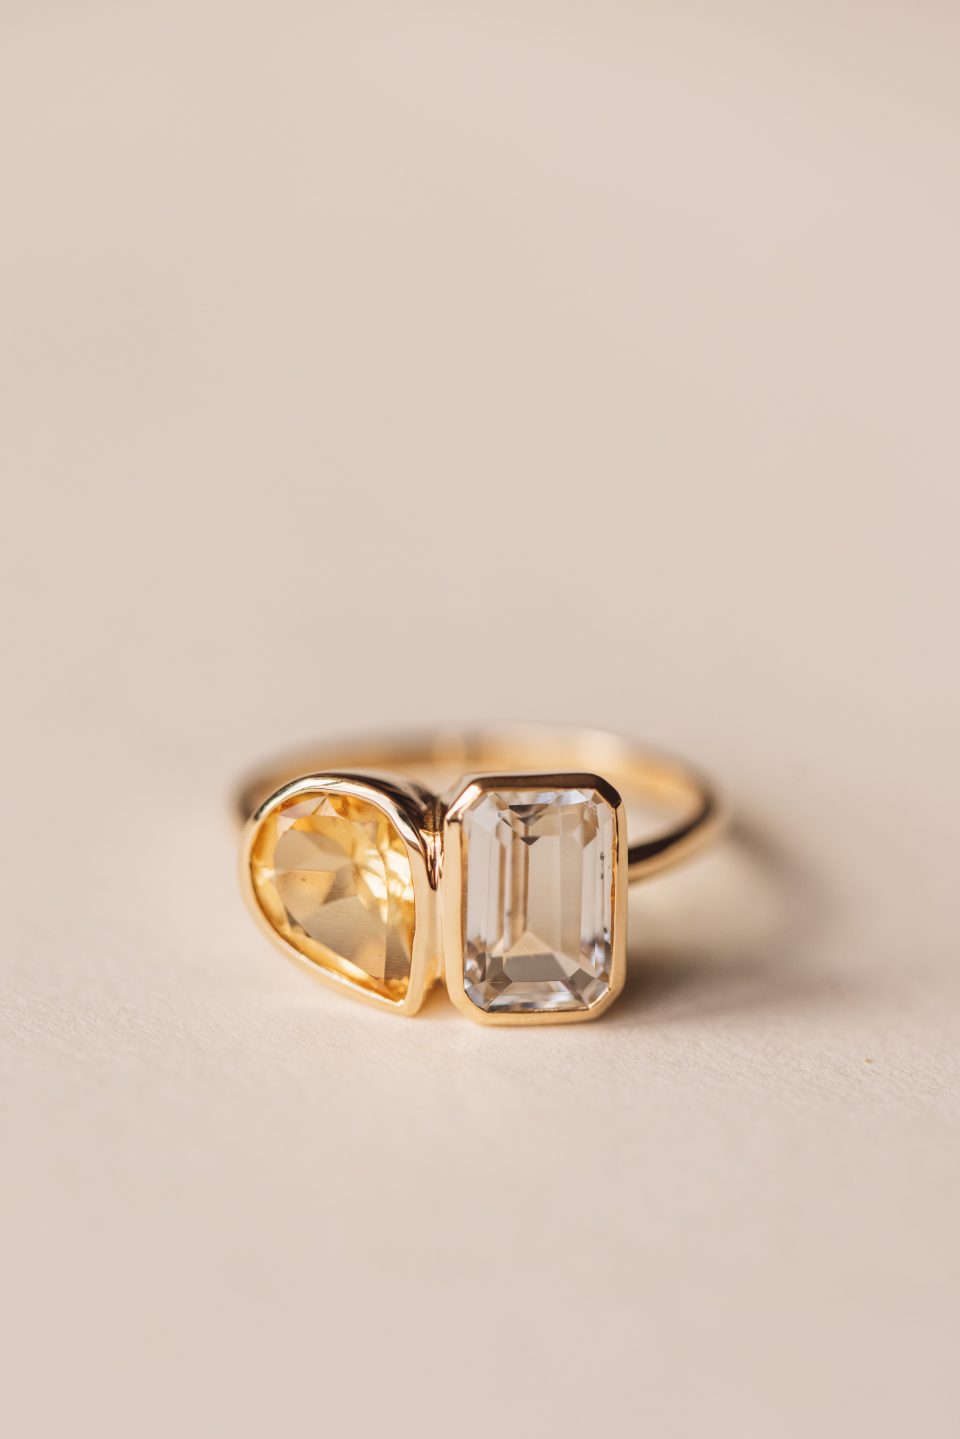 Toi et Moi Ring with Citrine and White Topaz in 14kt Yellow Gold